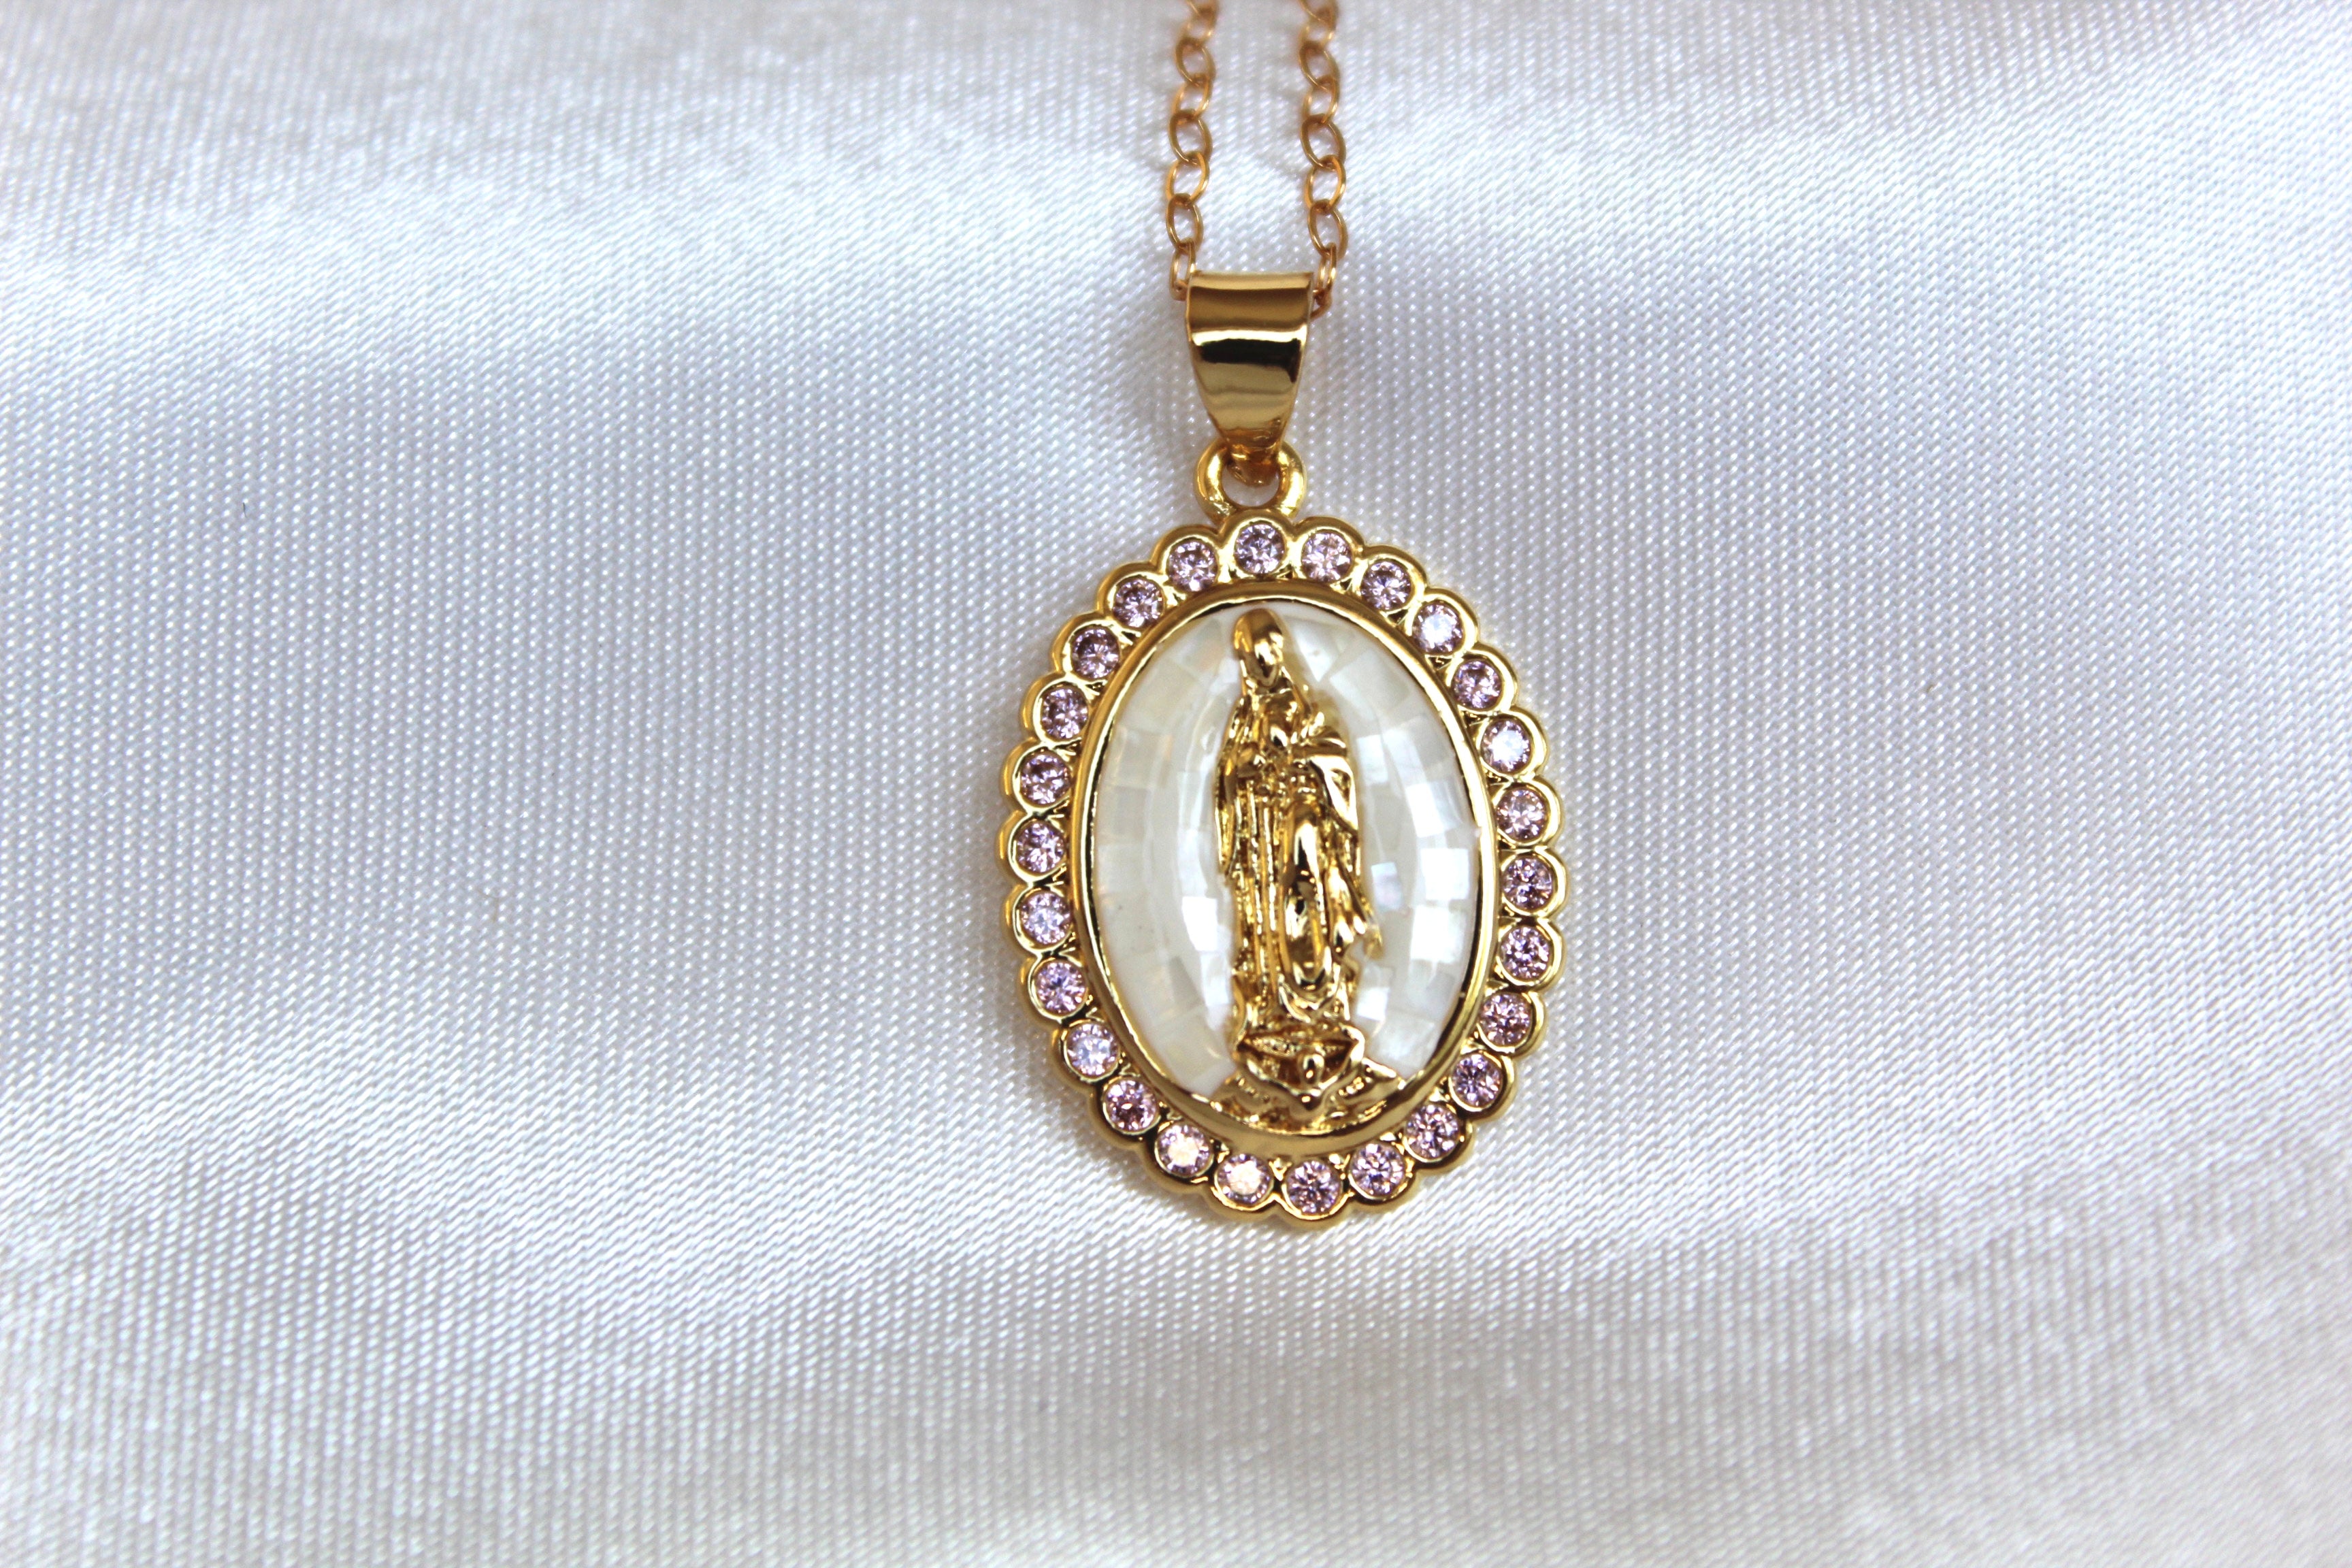 14k Gold Two Tone Our Lady of Guadalupe Pendant Necklace